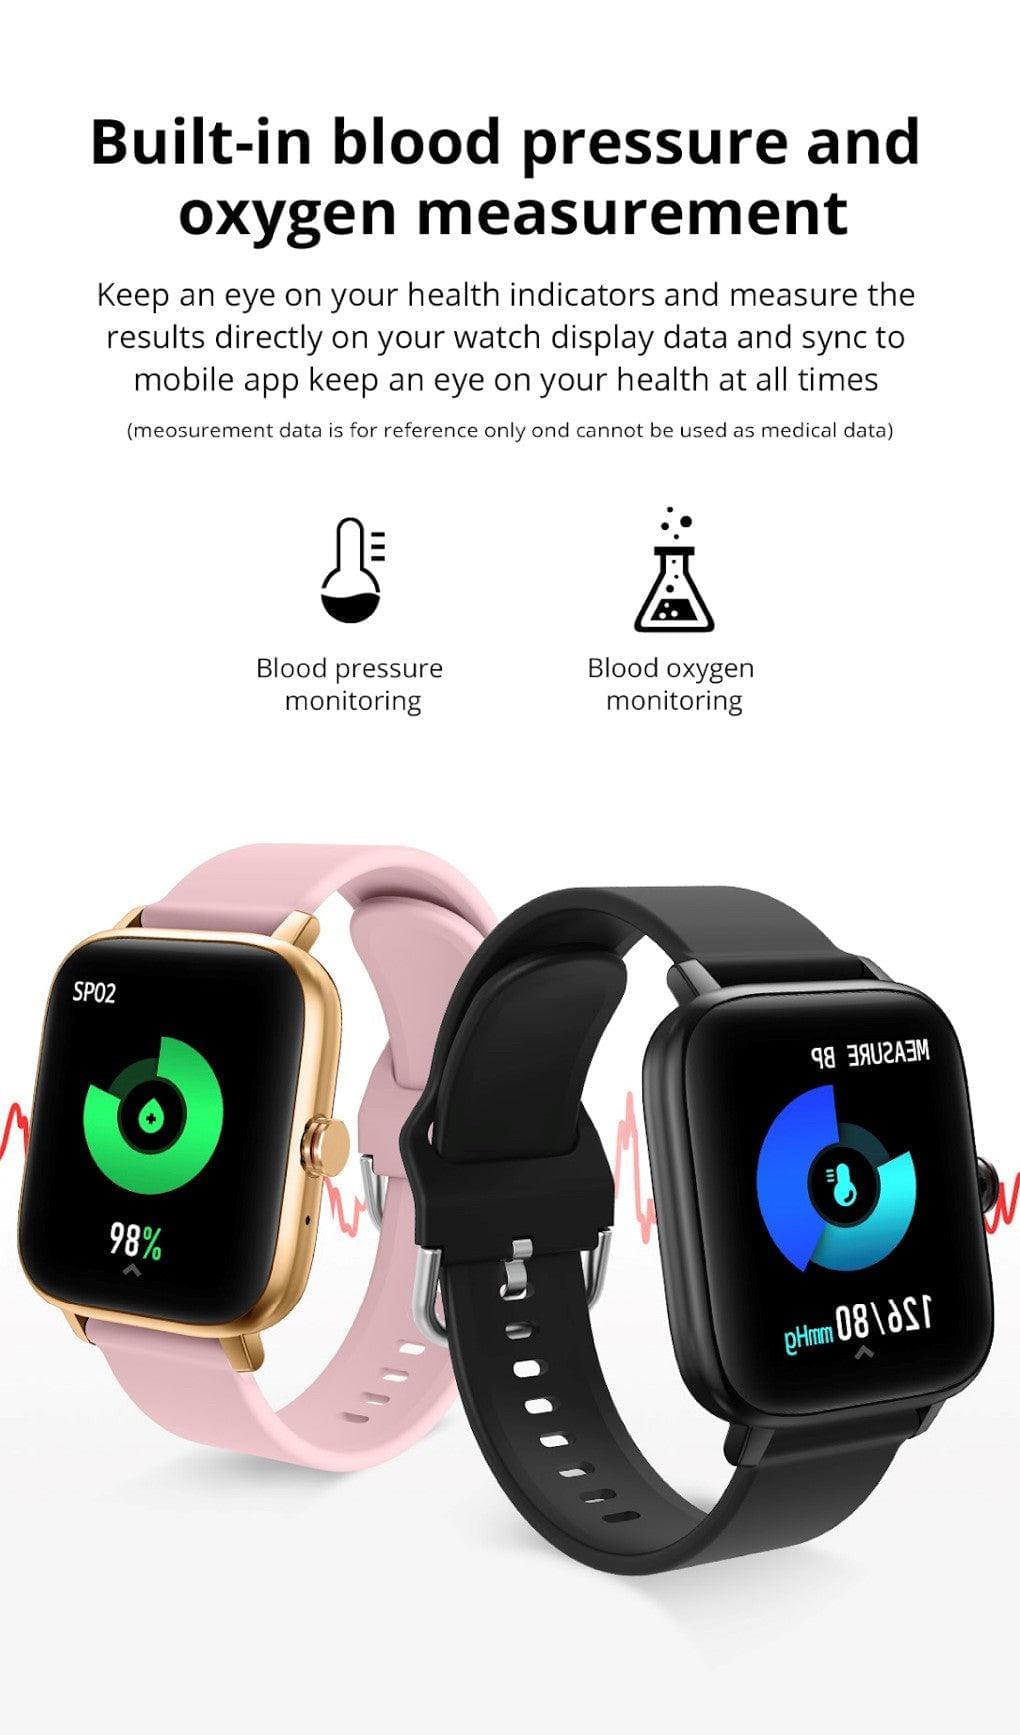 COLMI P8 MAX With BT Call Gold Pink Smart Watch South Africa